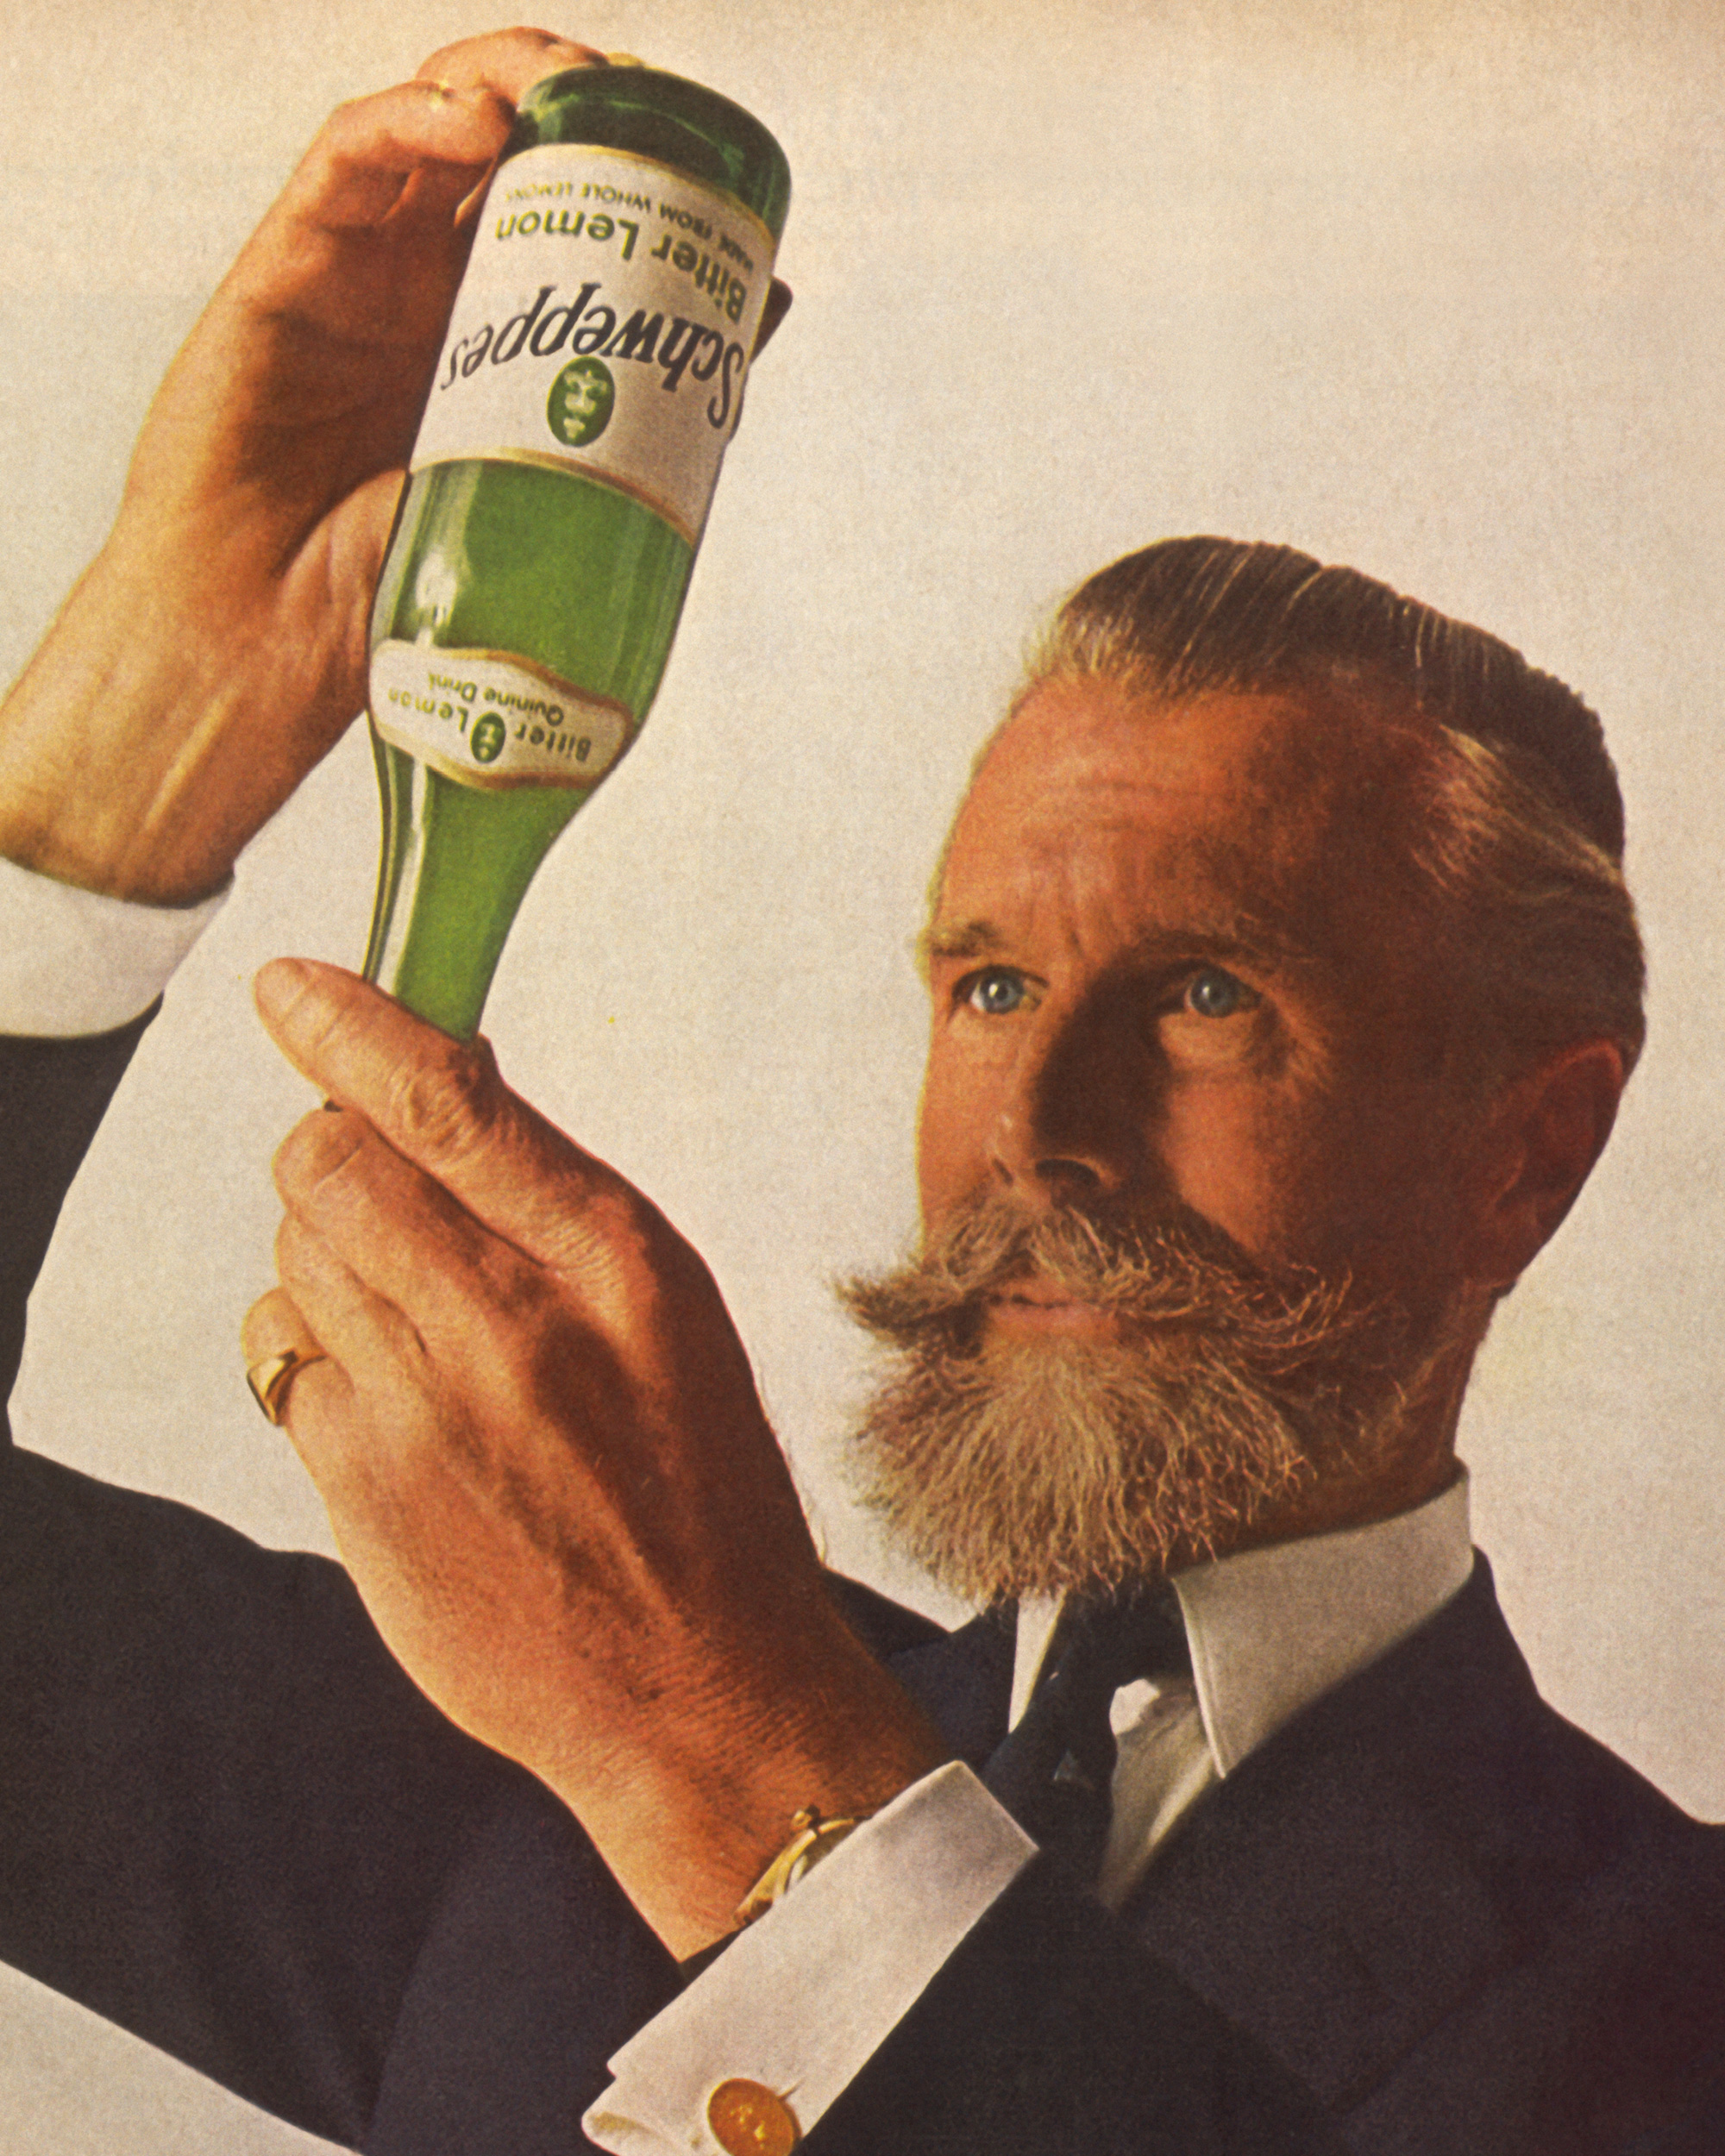 “Commander Whitehead,” the impossibly photogenic “President of Schweppes (USA) Ltd.,” verifies that the new batch of bitter lemon is molto freaking frizzante. Print ad, Time, 11 June 1965.